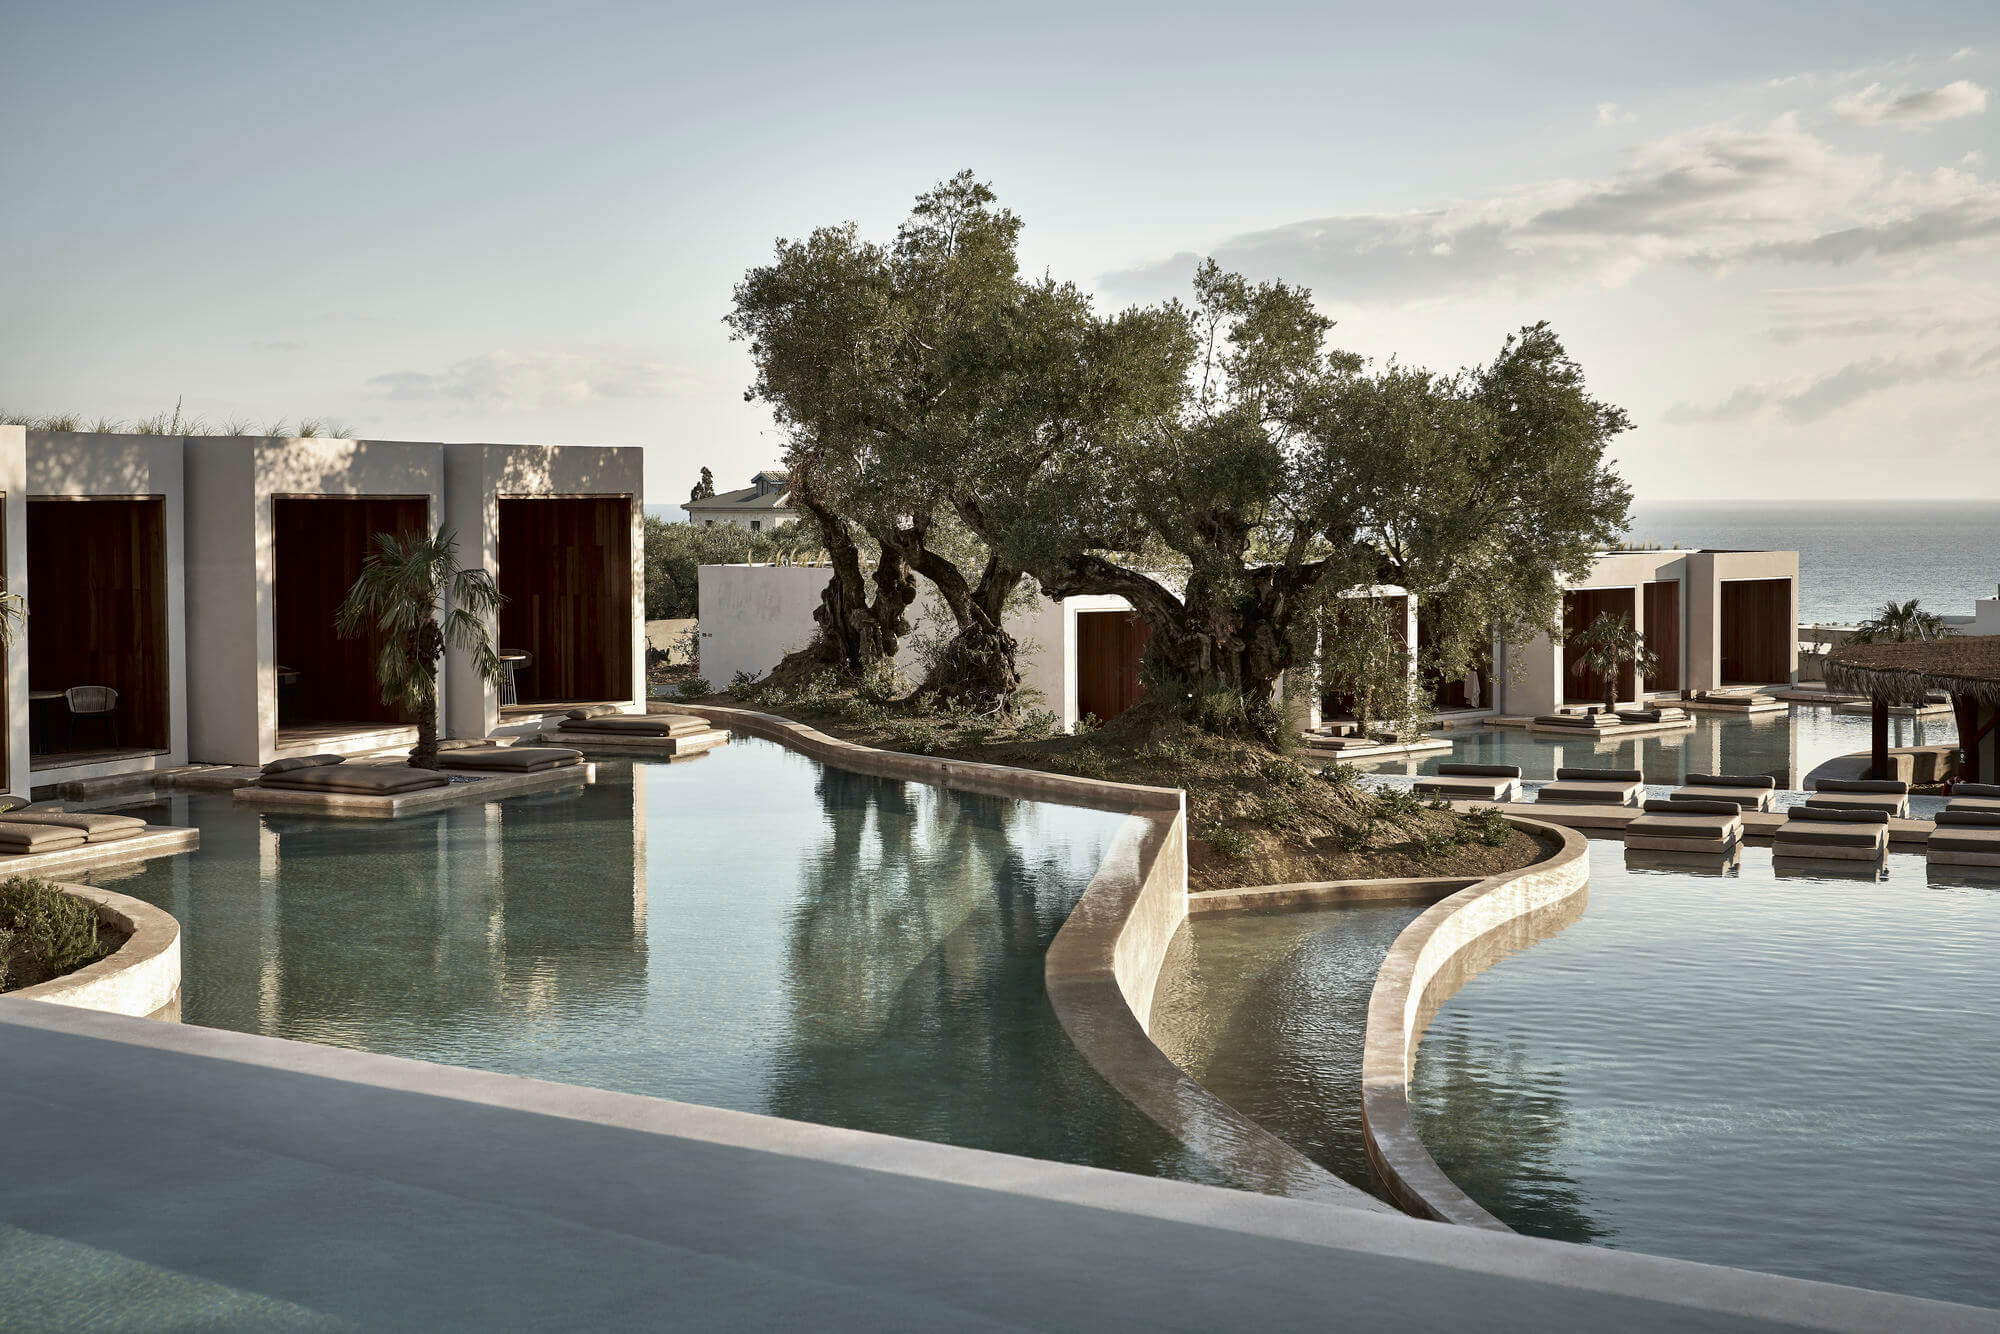 The Olea Suites Hotel by BLOCK722 Architects+